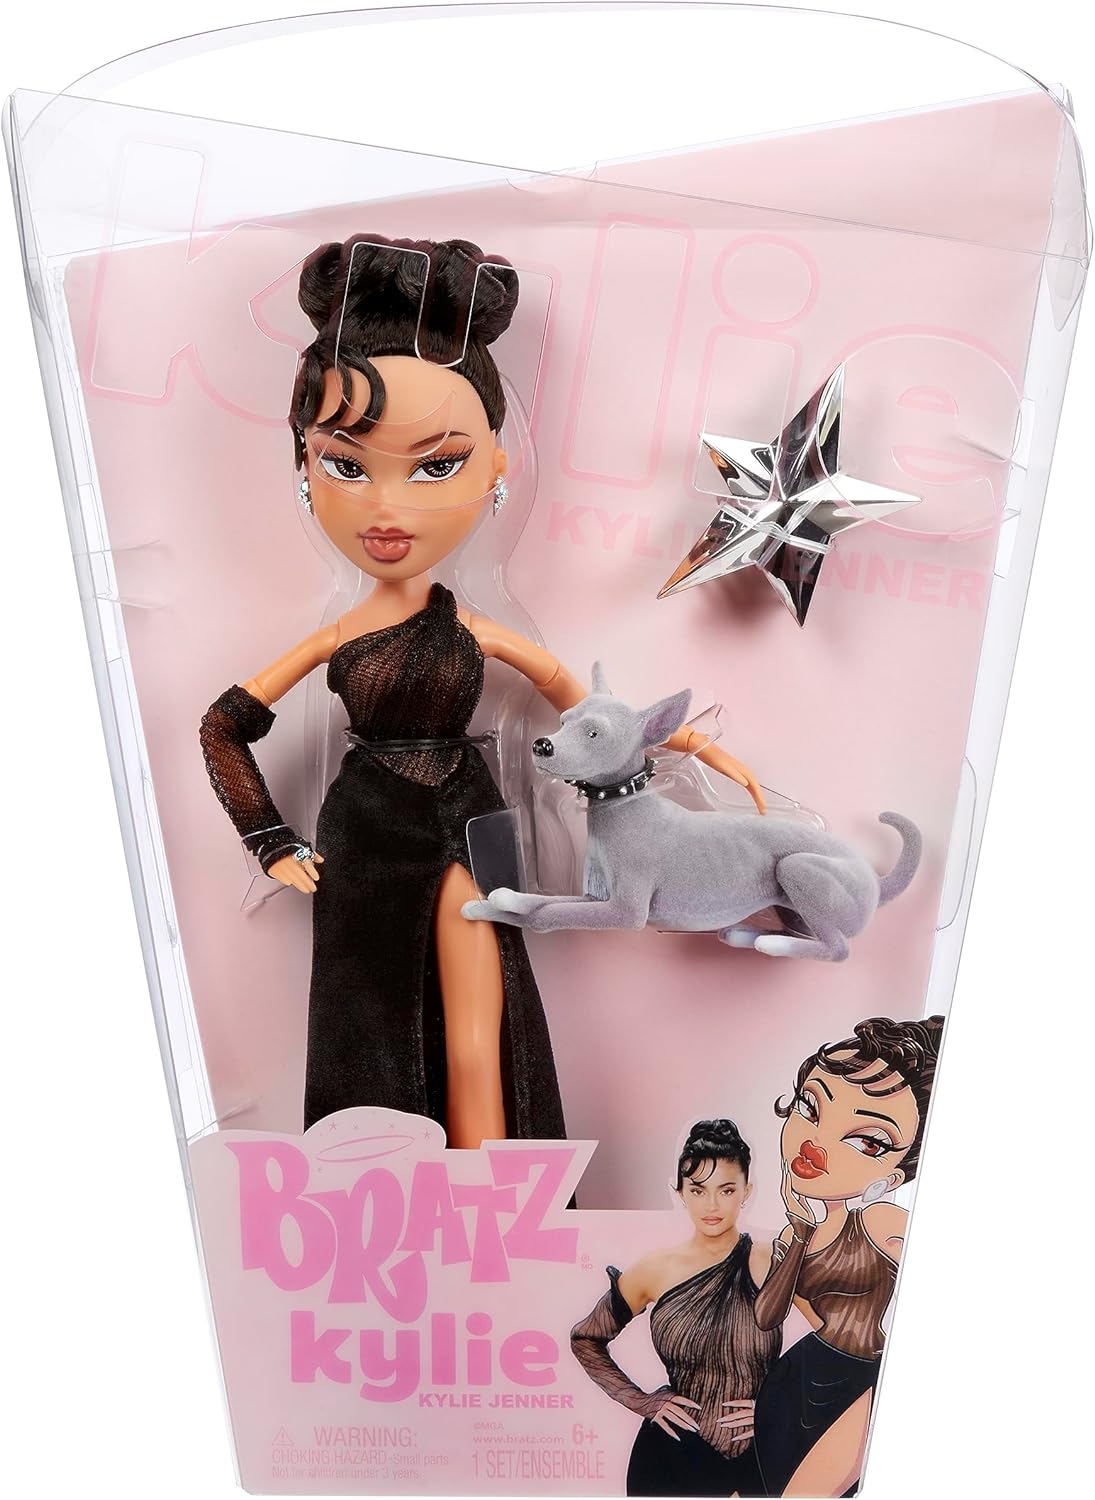 Bratz x Kylie Jenner Night Fashion Doll w/ Evening Gown, Pet Dog, & Poster $12.49 + Free Shipping w/ Prime or on $35+